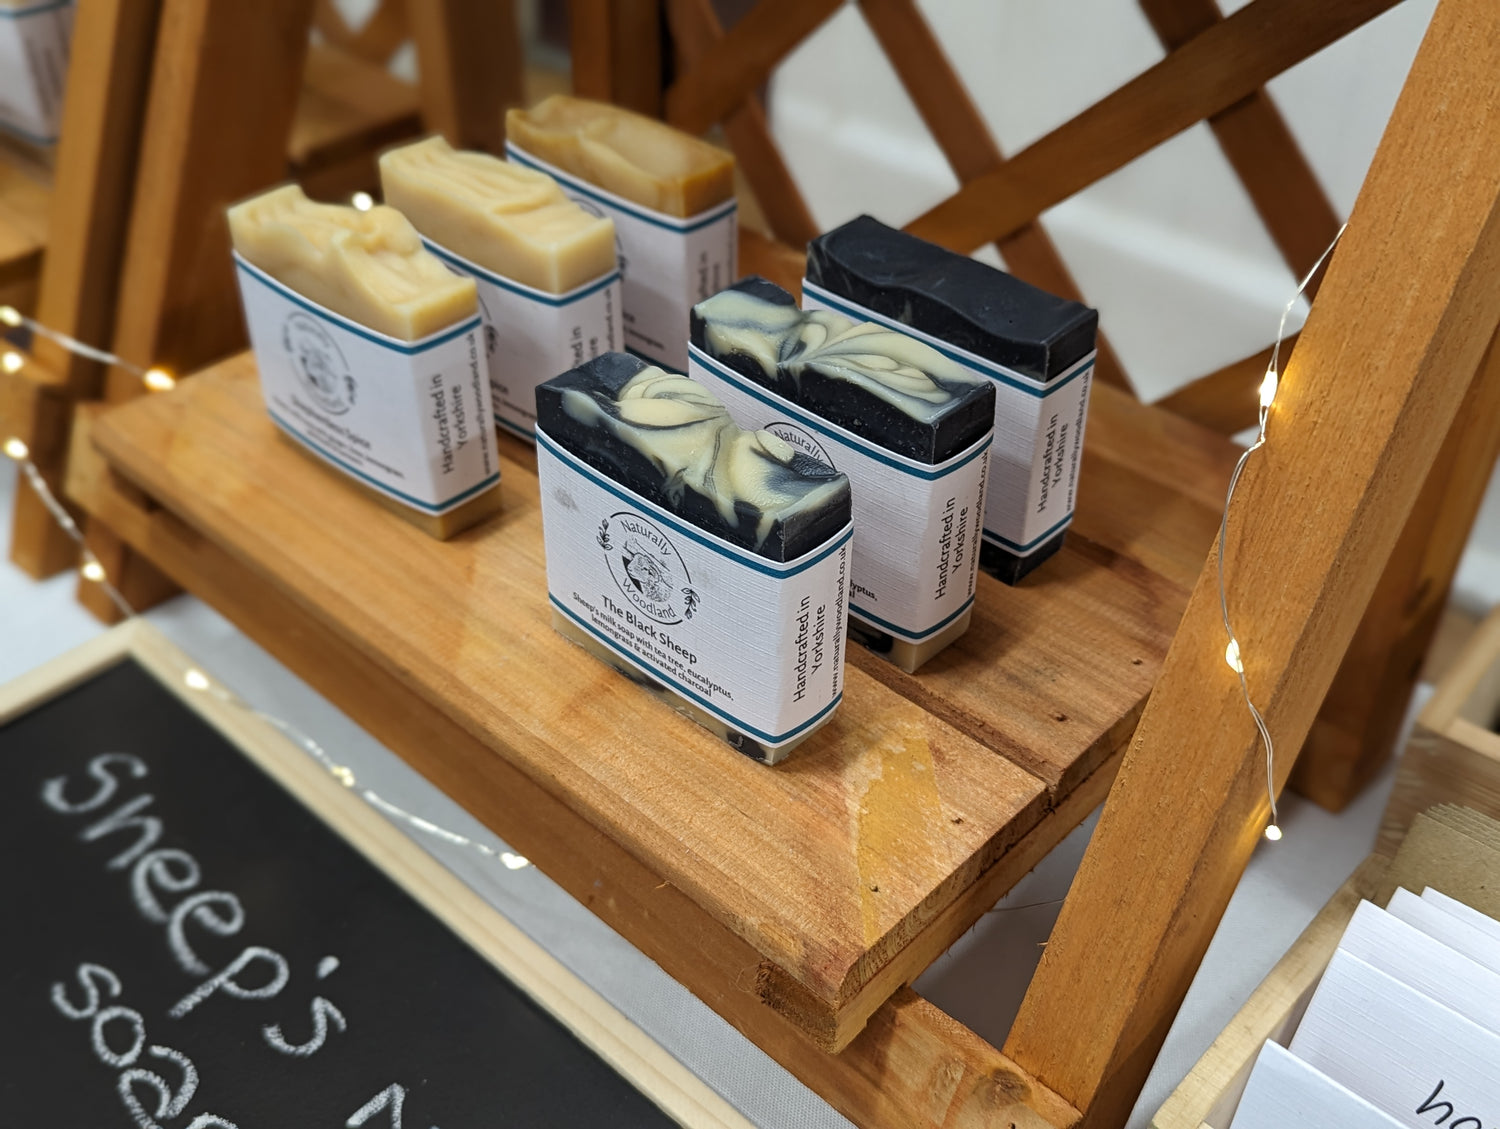 Handmade natural sheep's milk soaps from Whitefaced Woodland sheep, handmade in Yorkshire